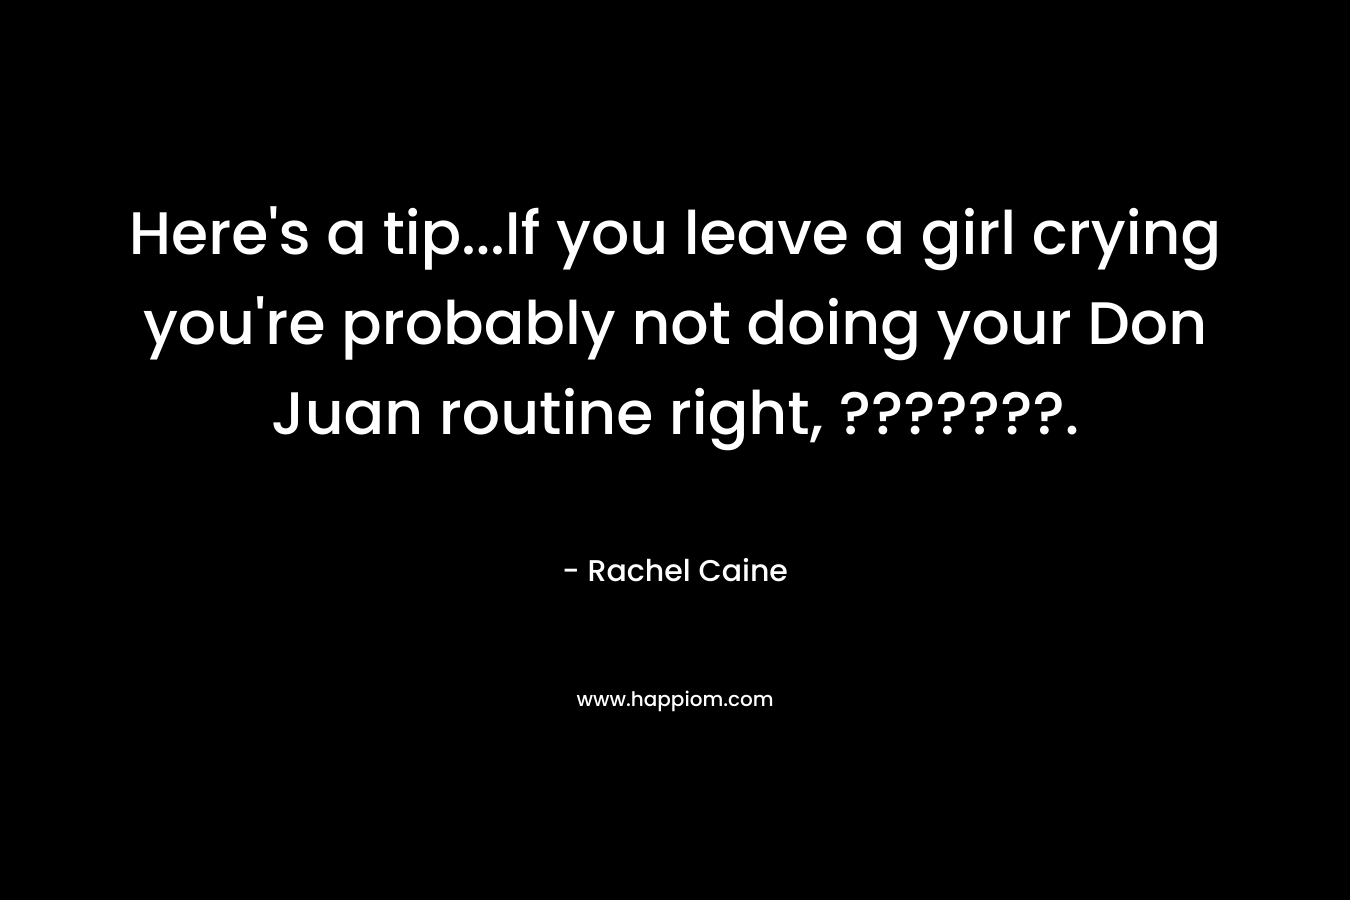 Here's a tip...If you leave a girl crying you're probably not doing your Don Juan routine right, ???????.